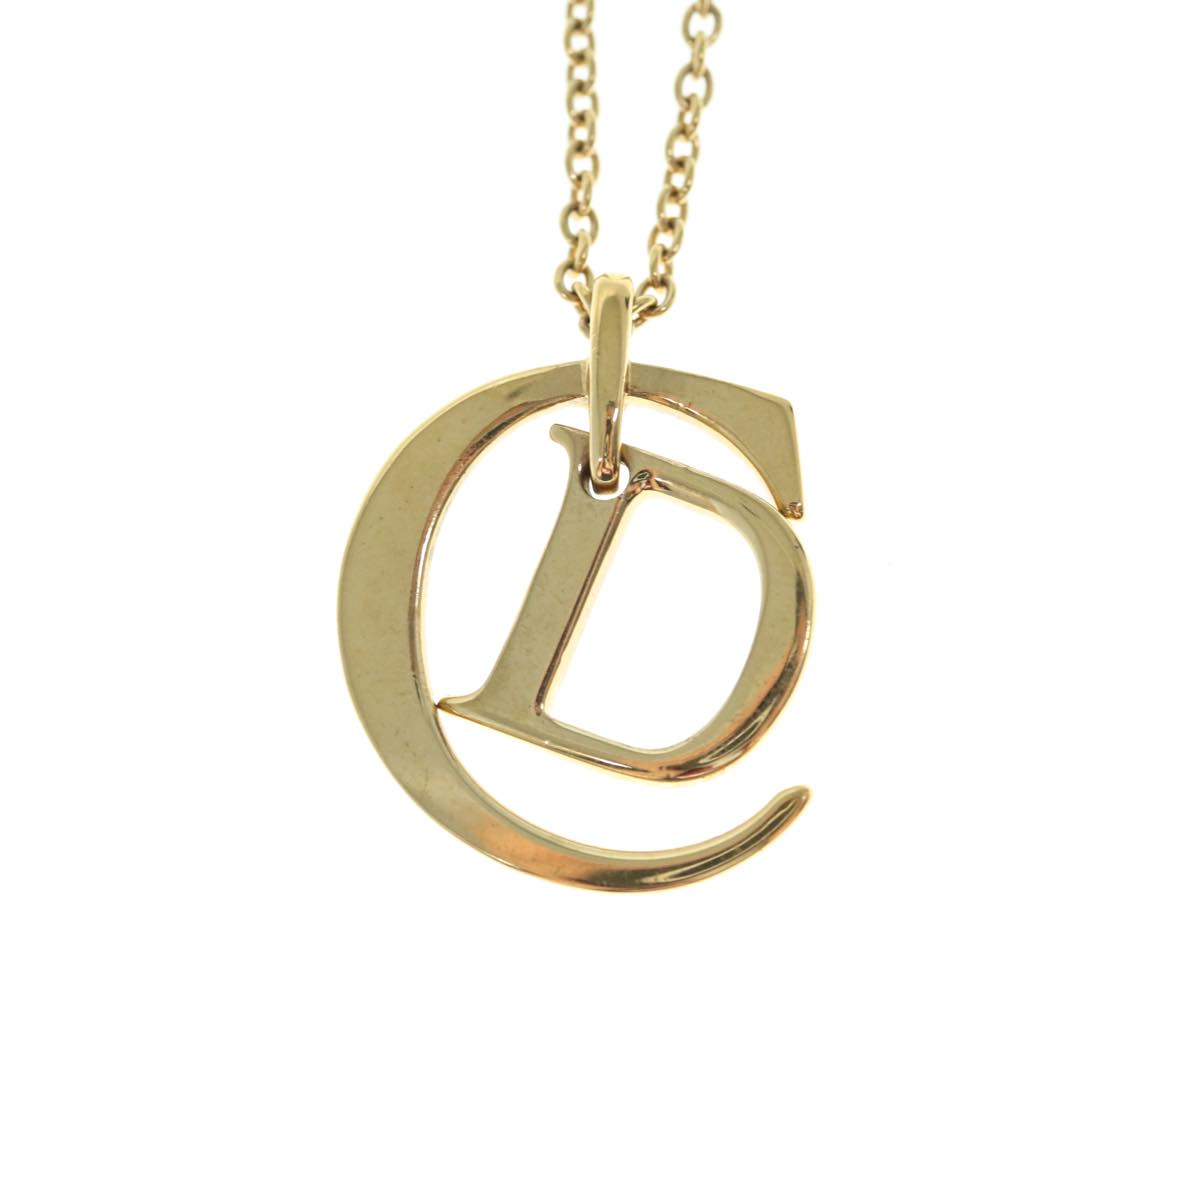 Christian Dior Necklace metal Gold Auth am5525